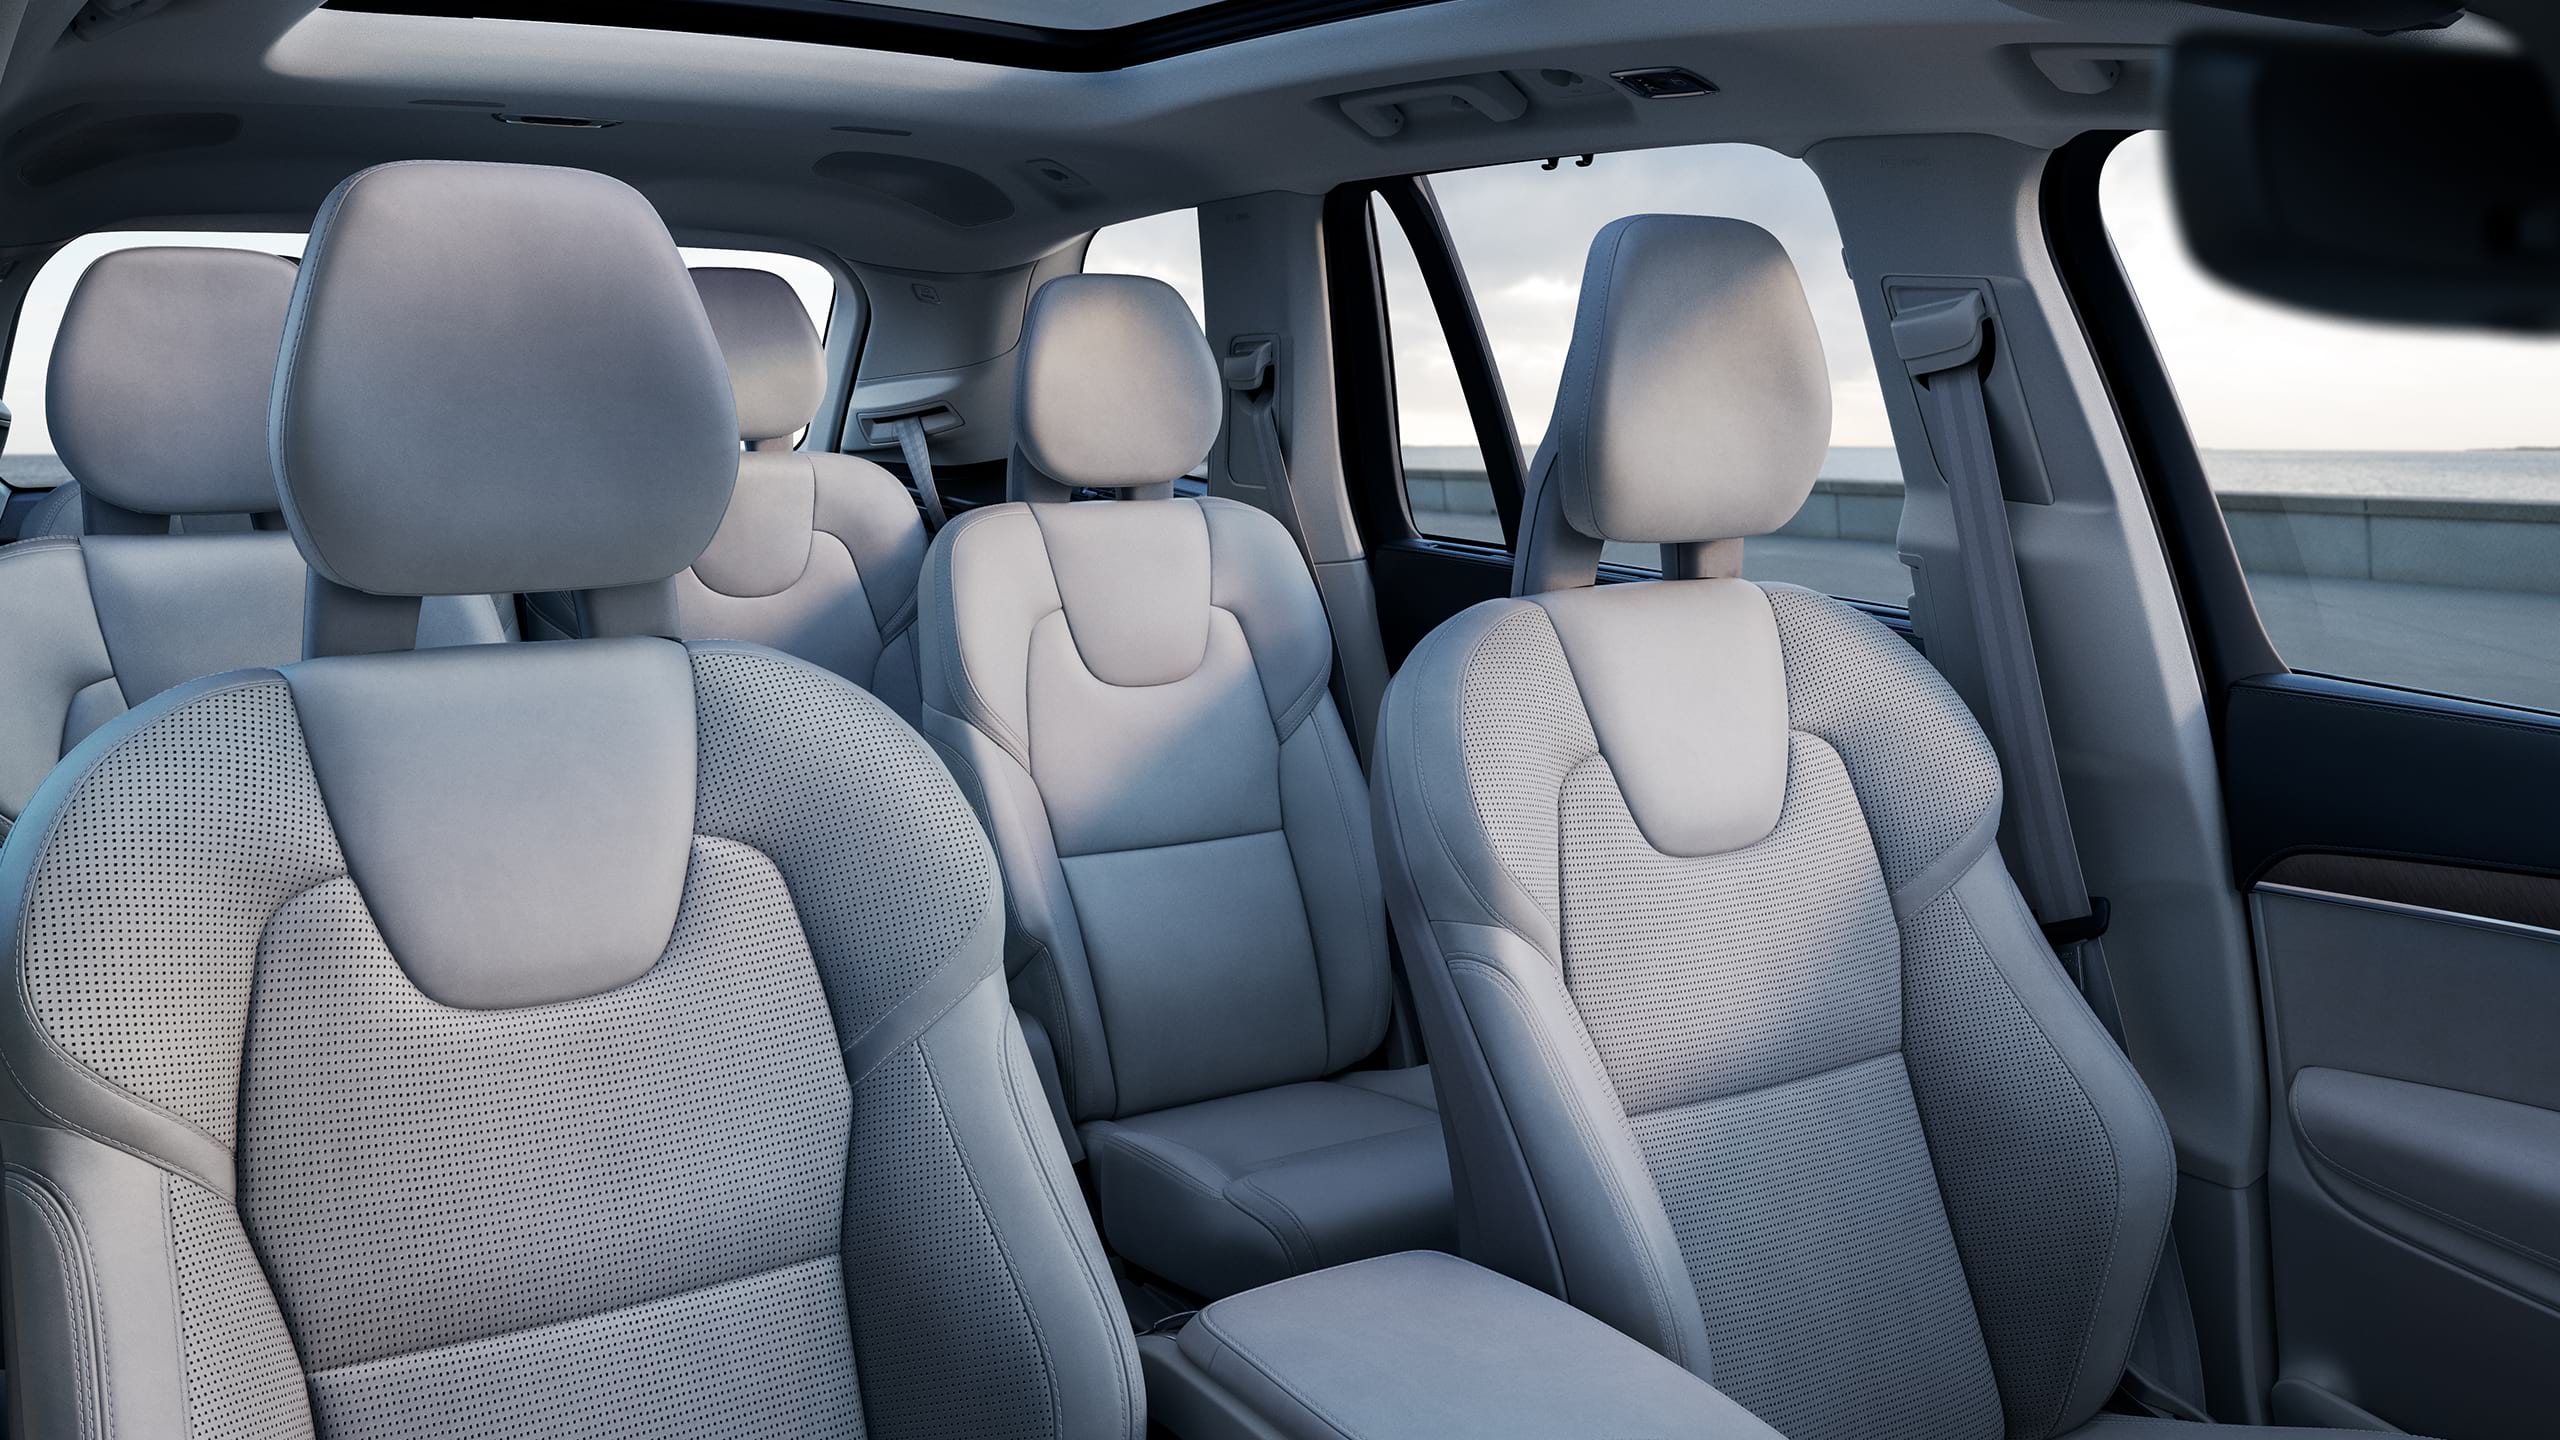 Inside a Volvo XC90 with 3 rows, blonde interior on seats